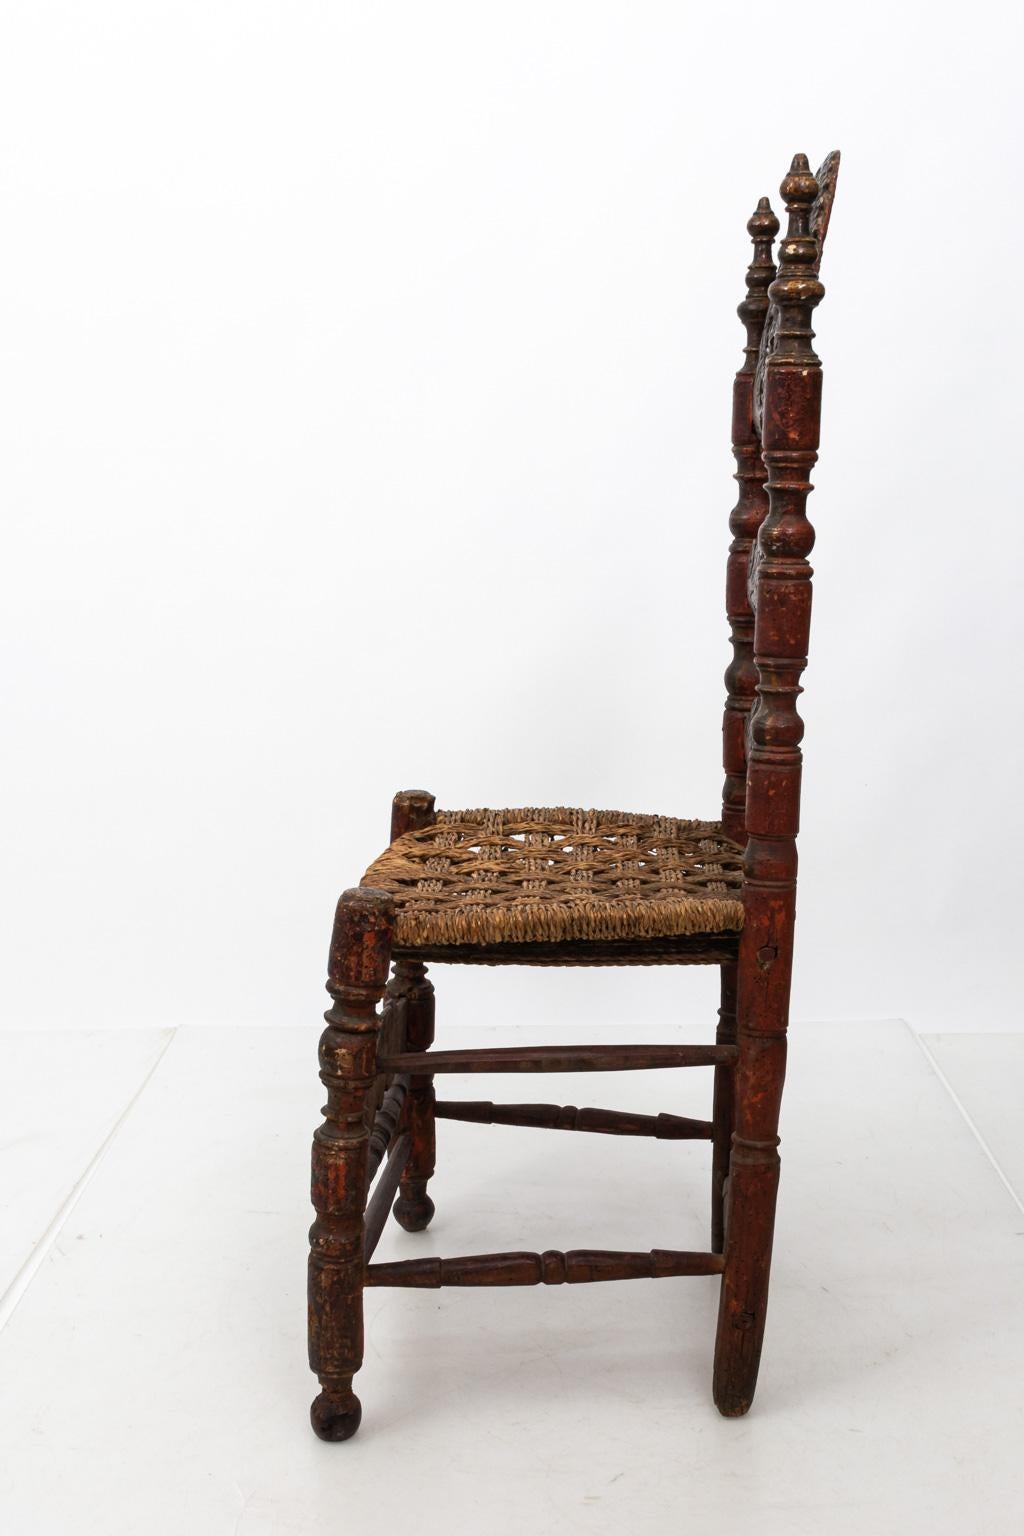 Pair of Early 18th Century Italian Chairs 1